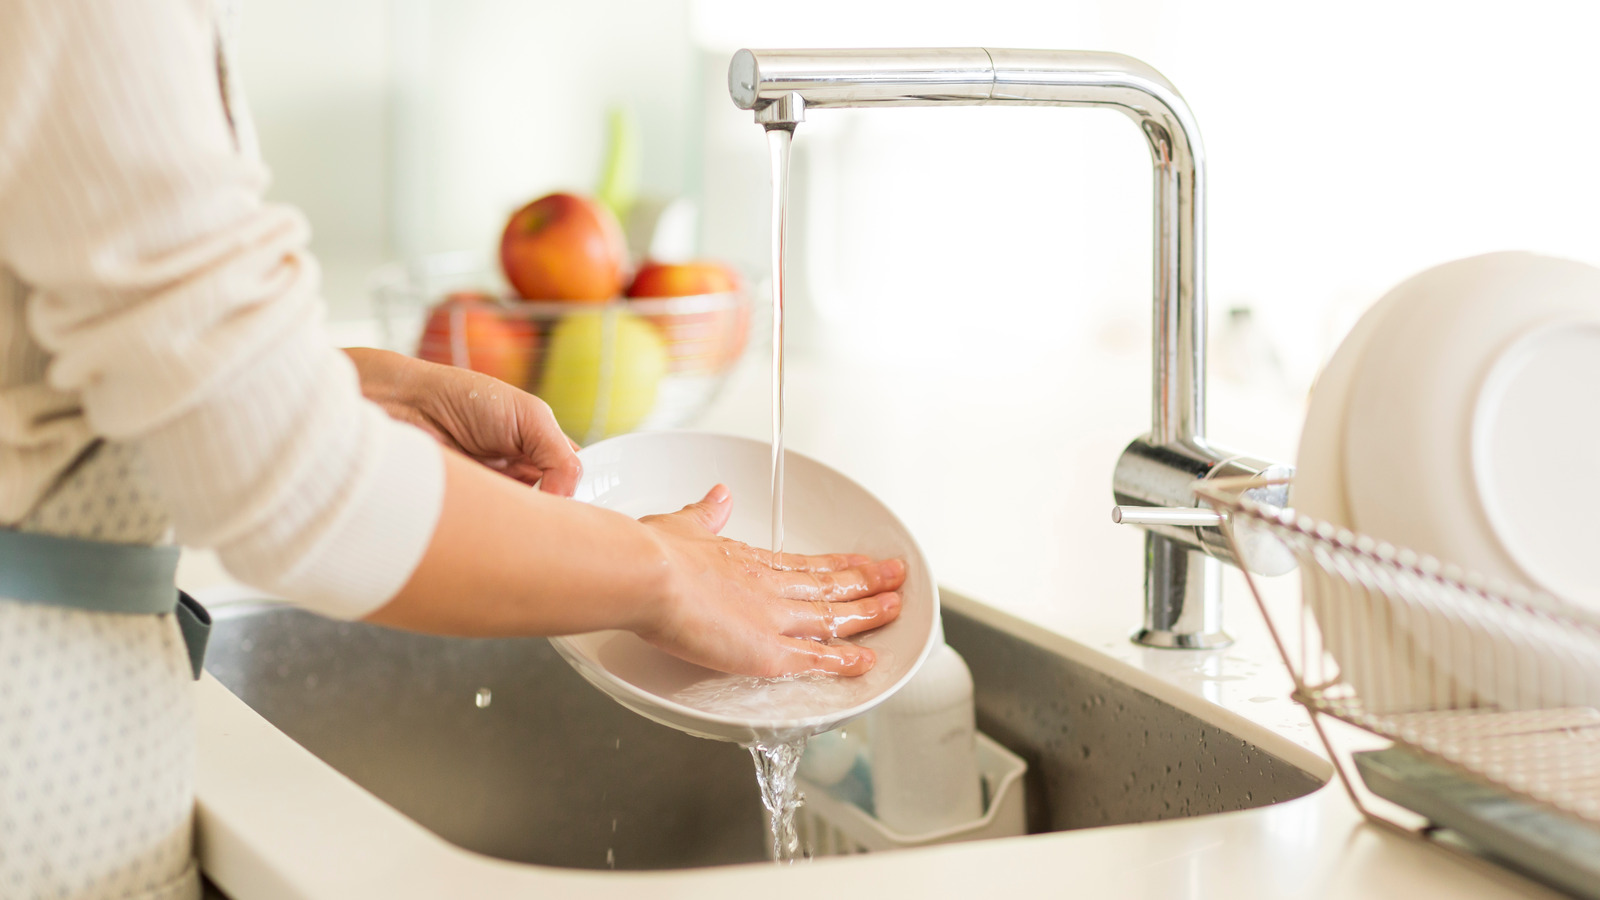 The Best Way to Hand Wash Your Dishes